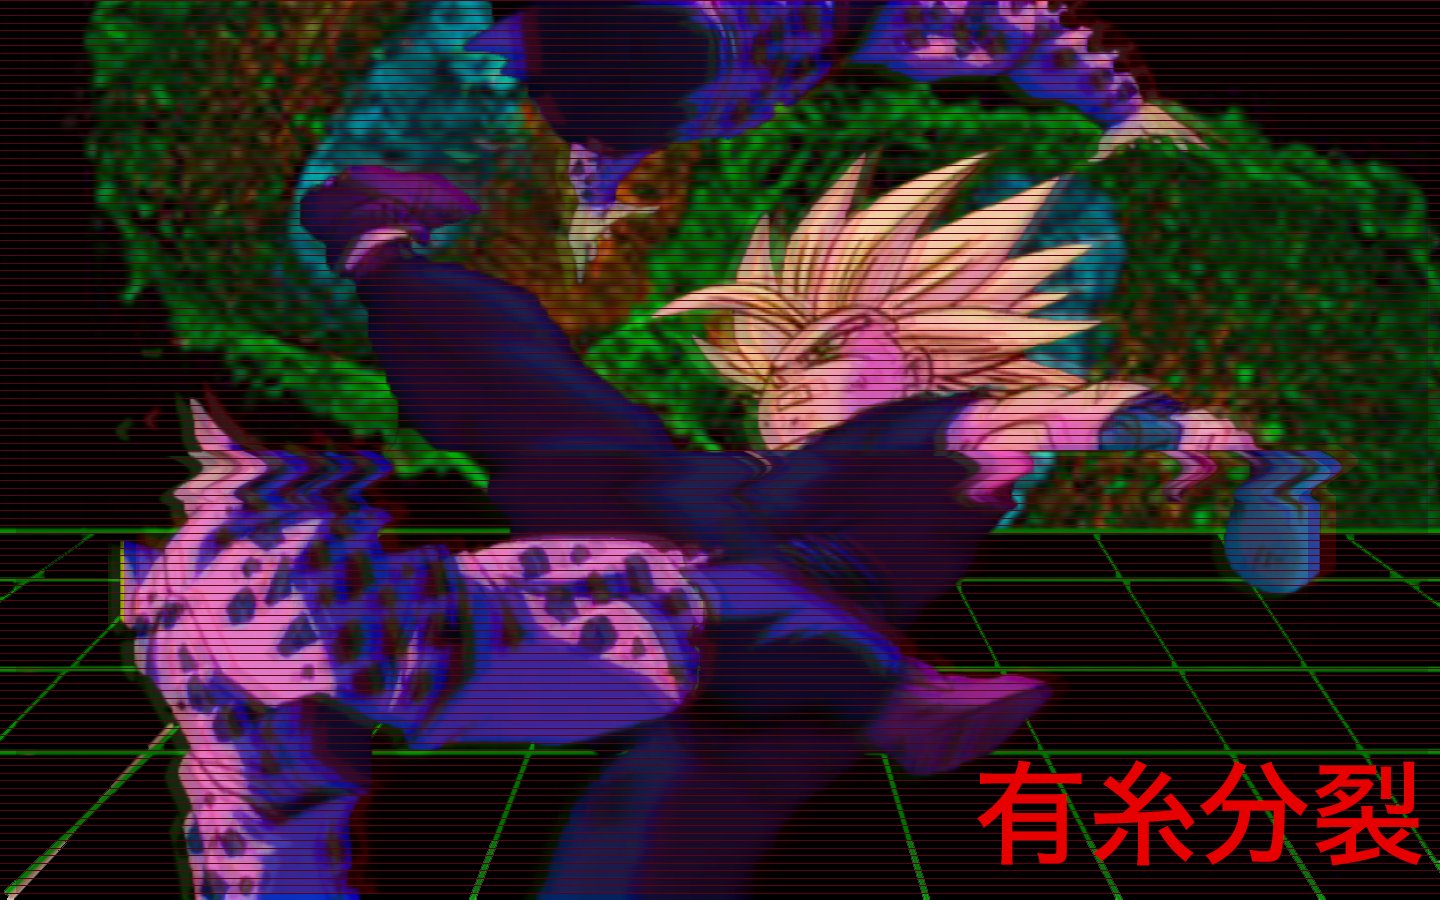 Dragon Ball Z Aesthetic Wallpapers Wallpaper Cave.